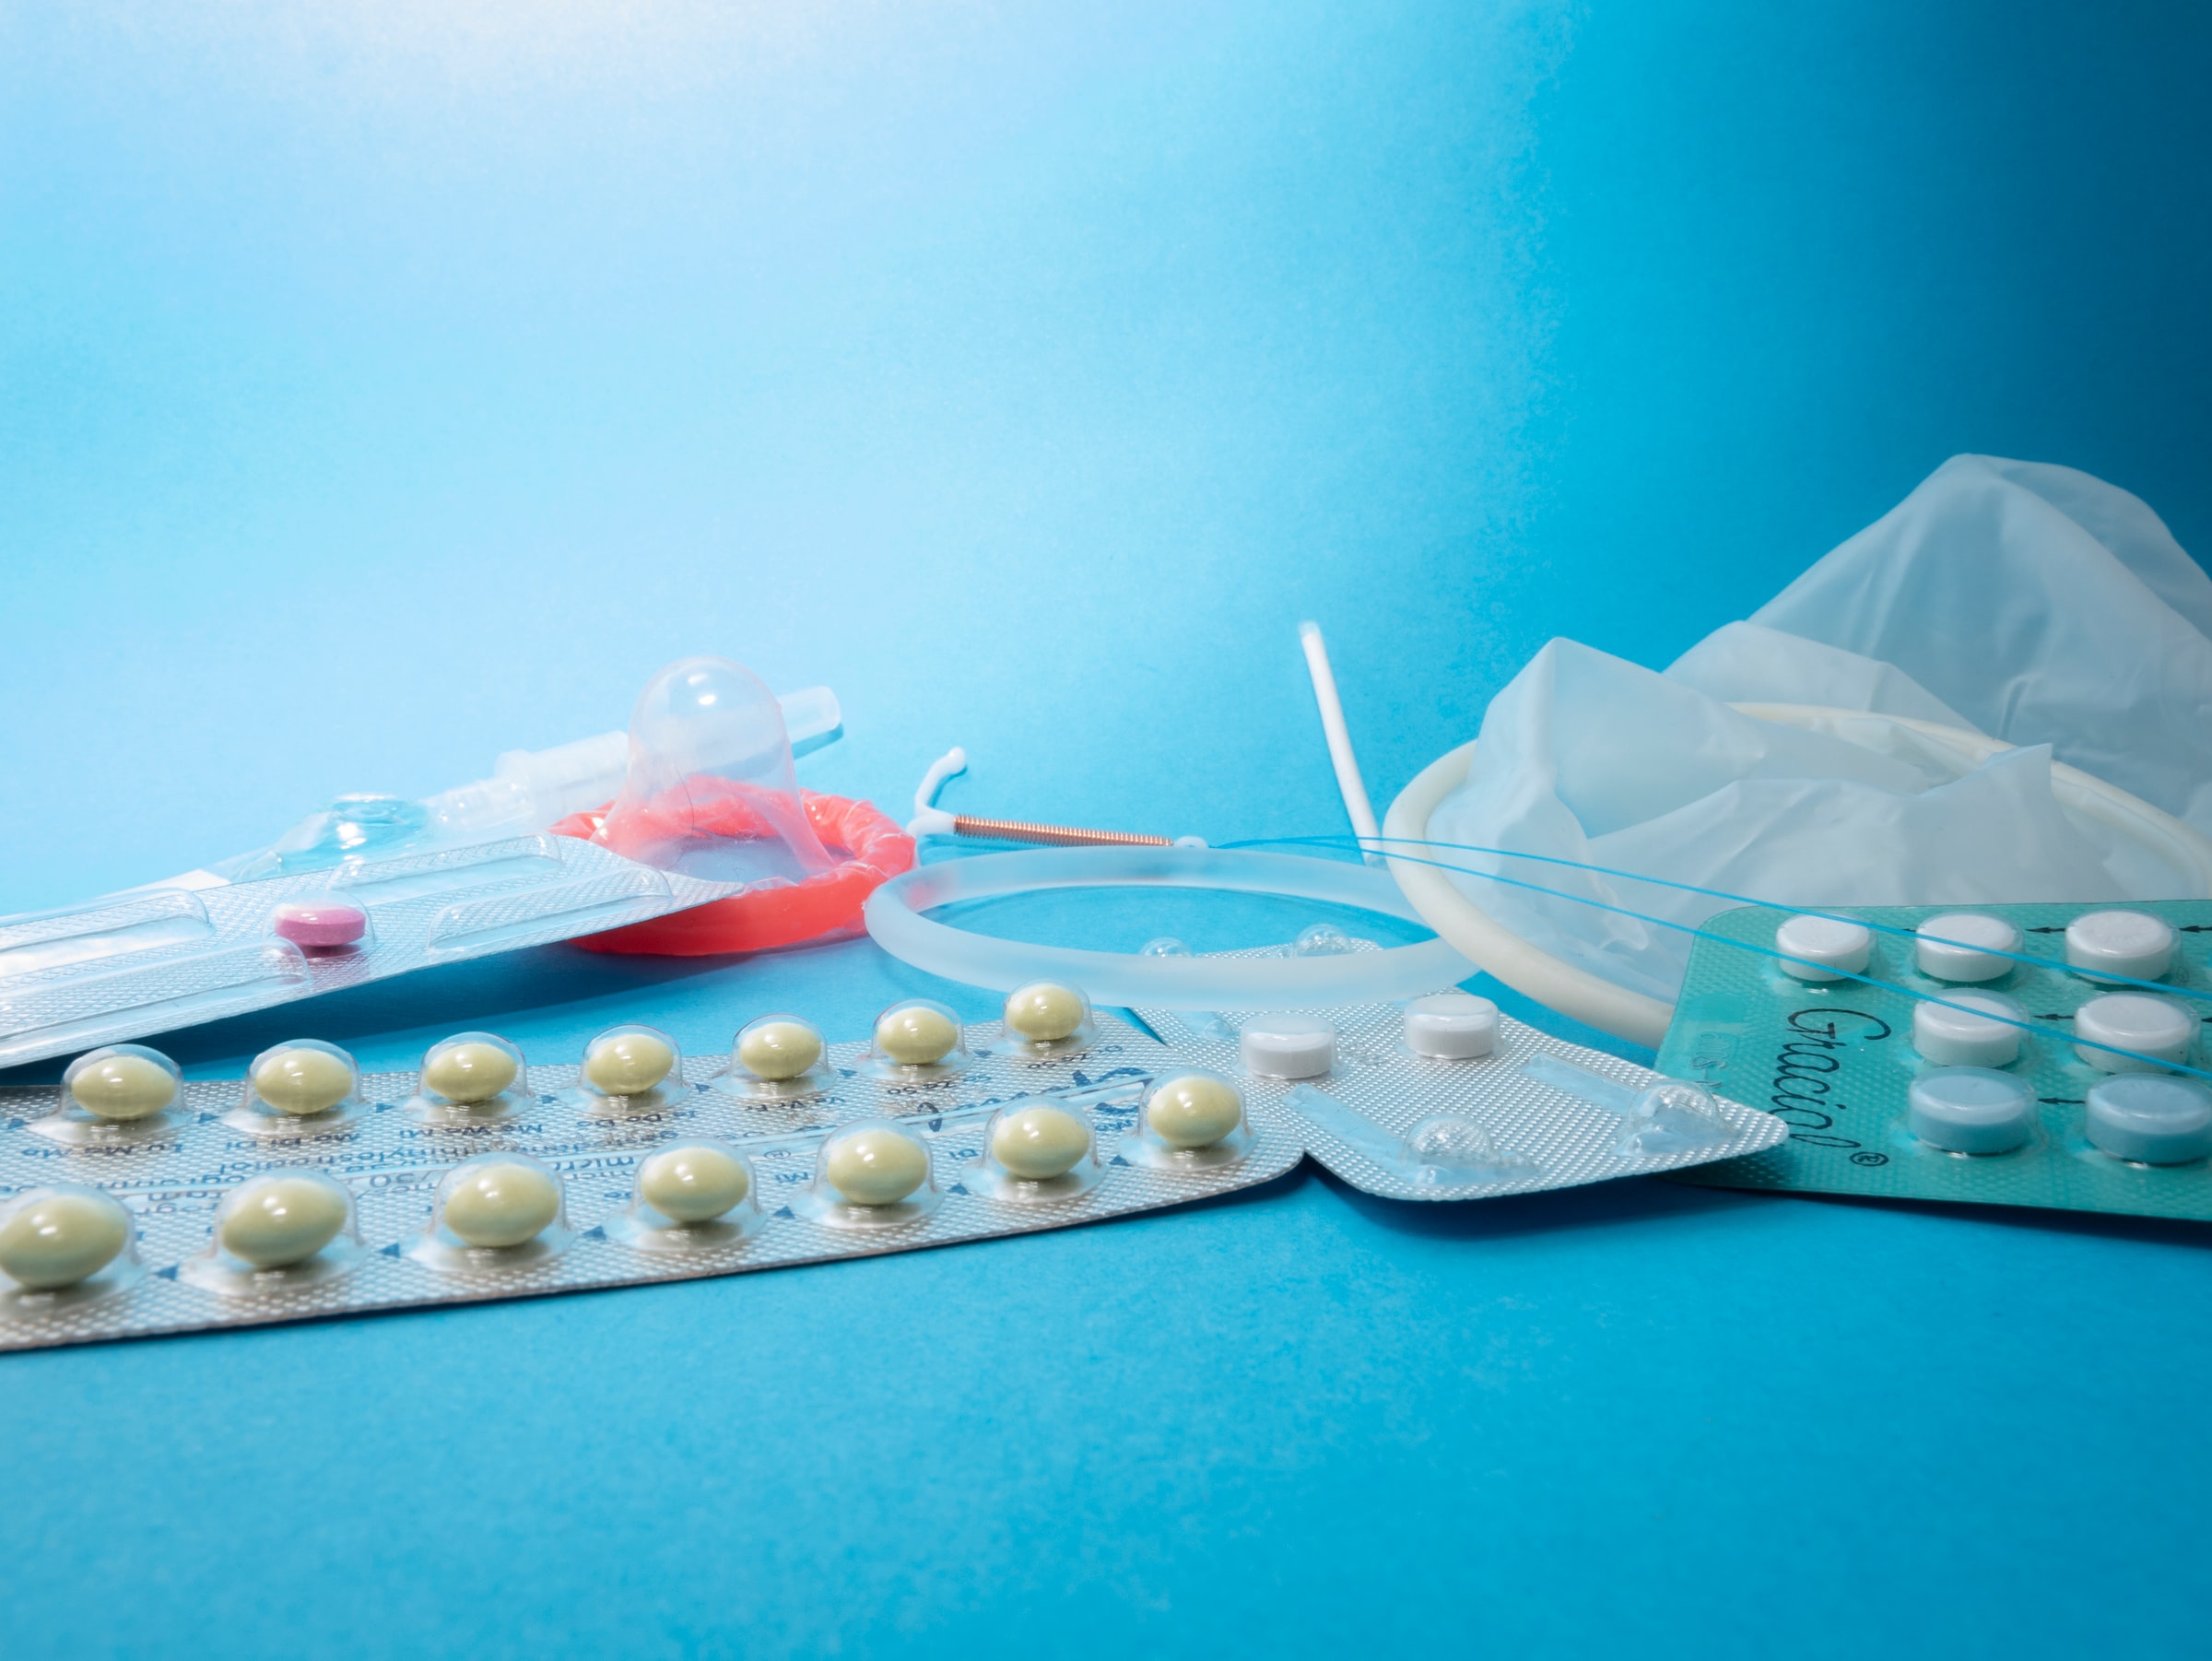 several birth control methods laid out on a blue background